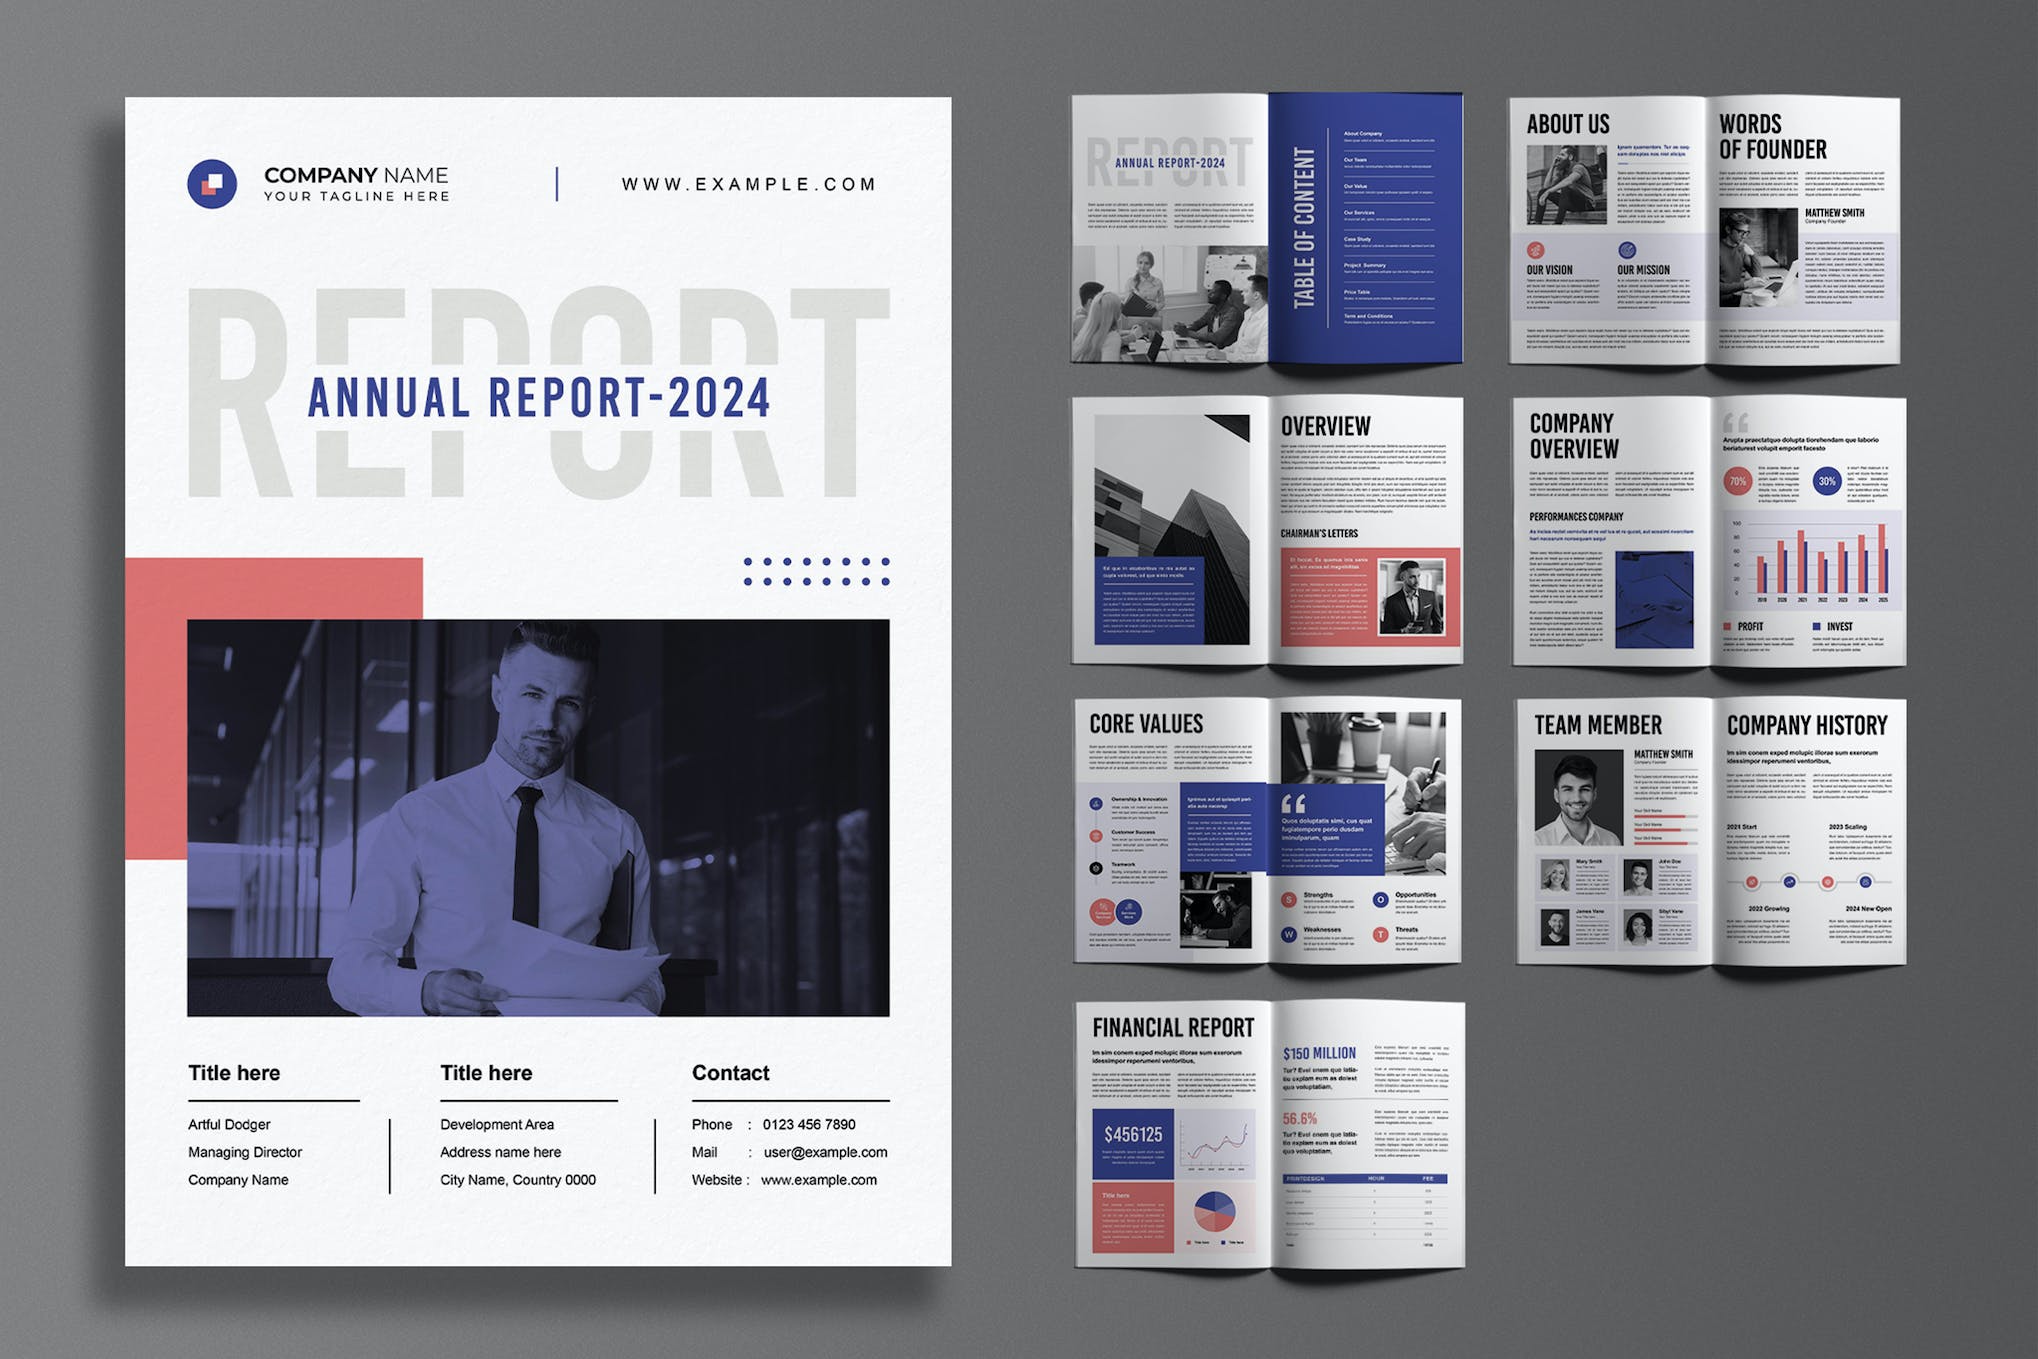 Stylish InDesign Annual Report Template